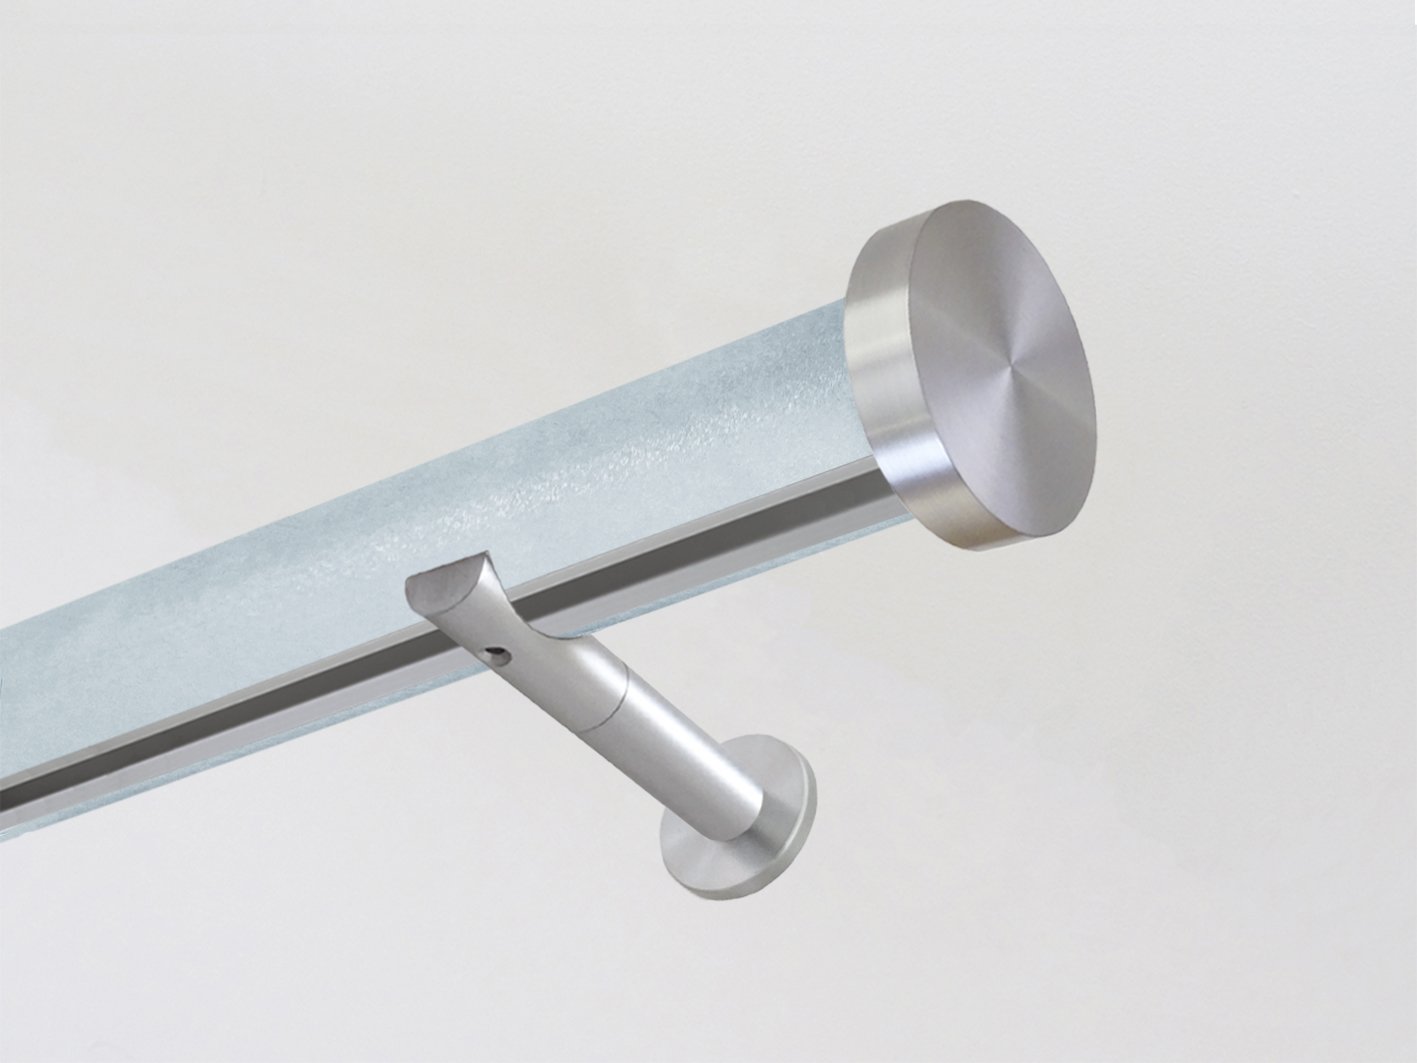 Sky blue wrapped & tracked curtain pole 50mm diameter | Walcot House